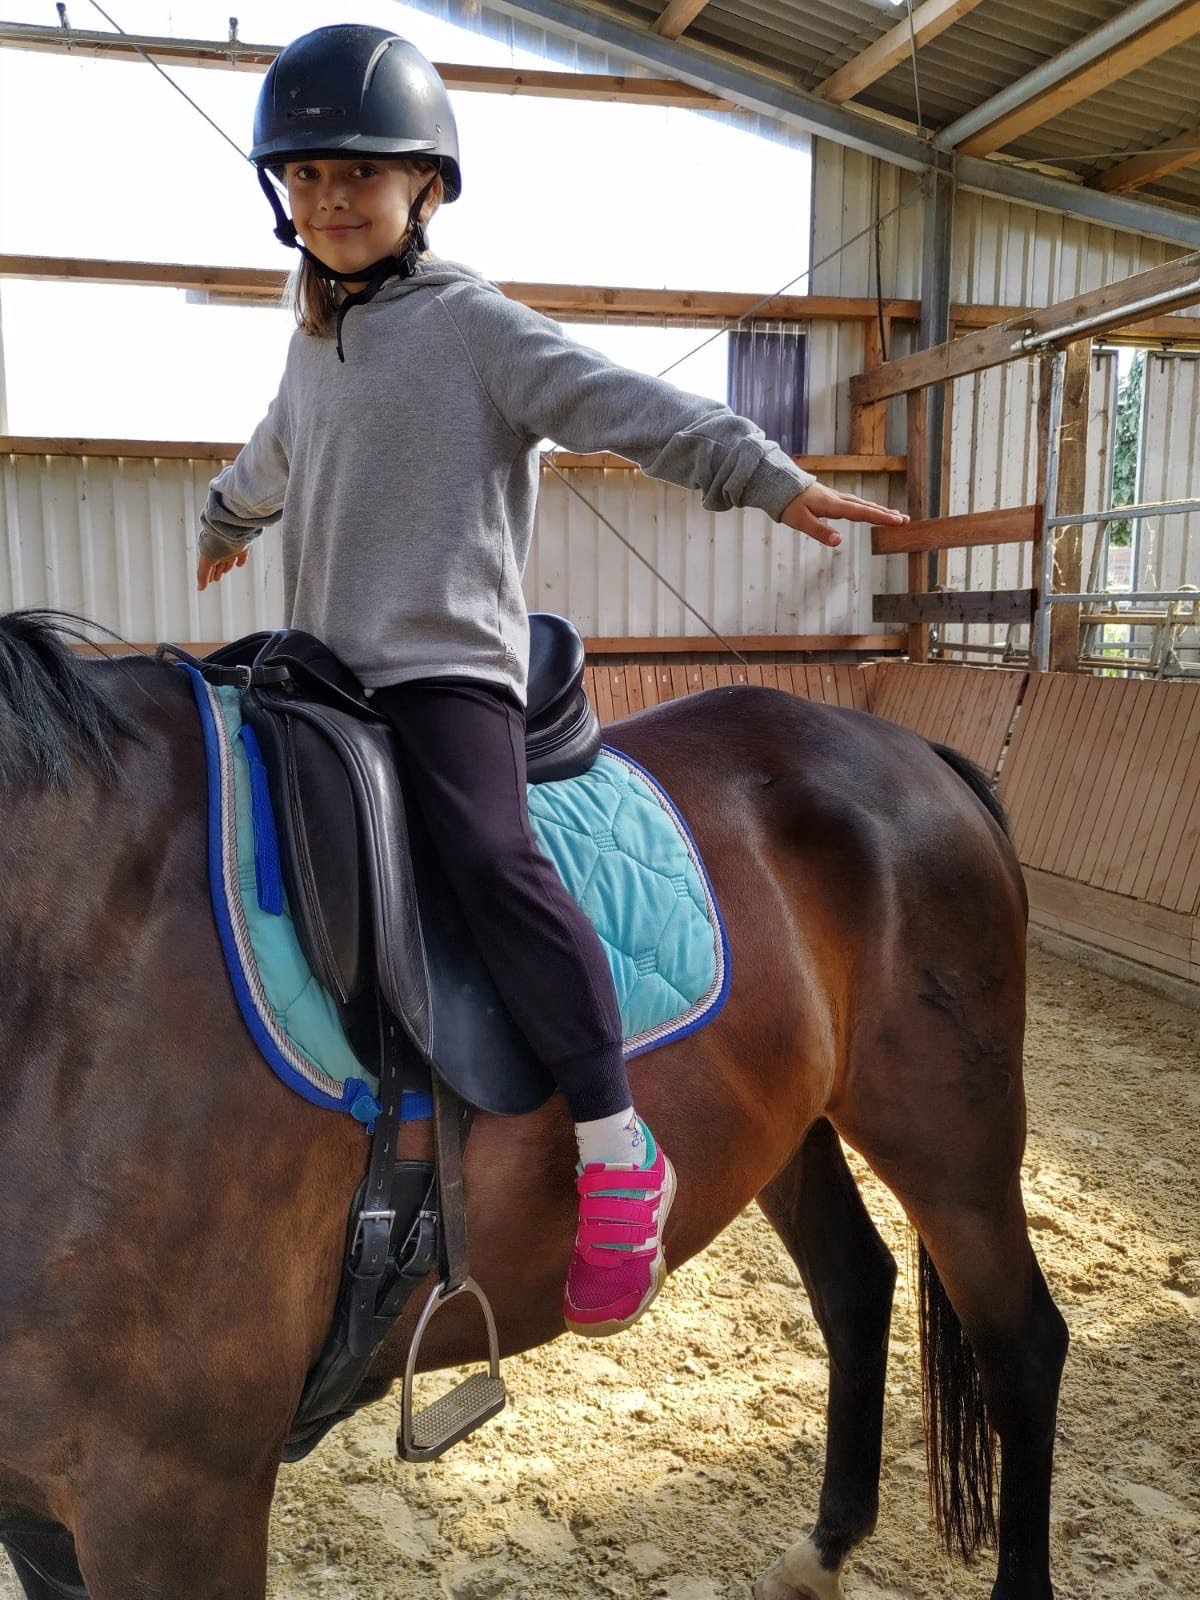 Maria, Tetyana's daughter, learns to ride in Germany |  Source: NEST project